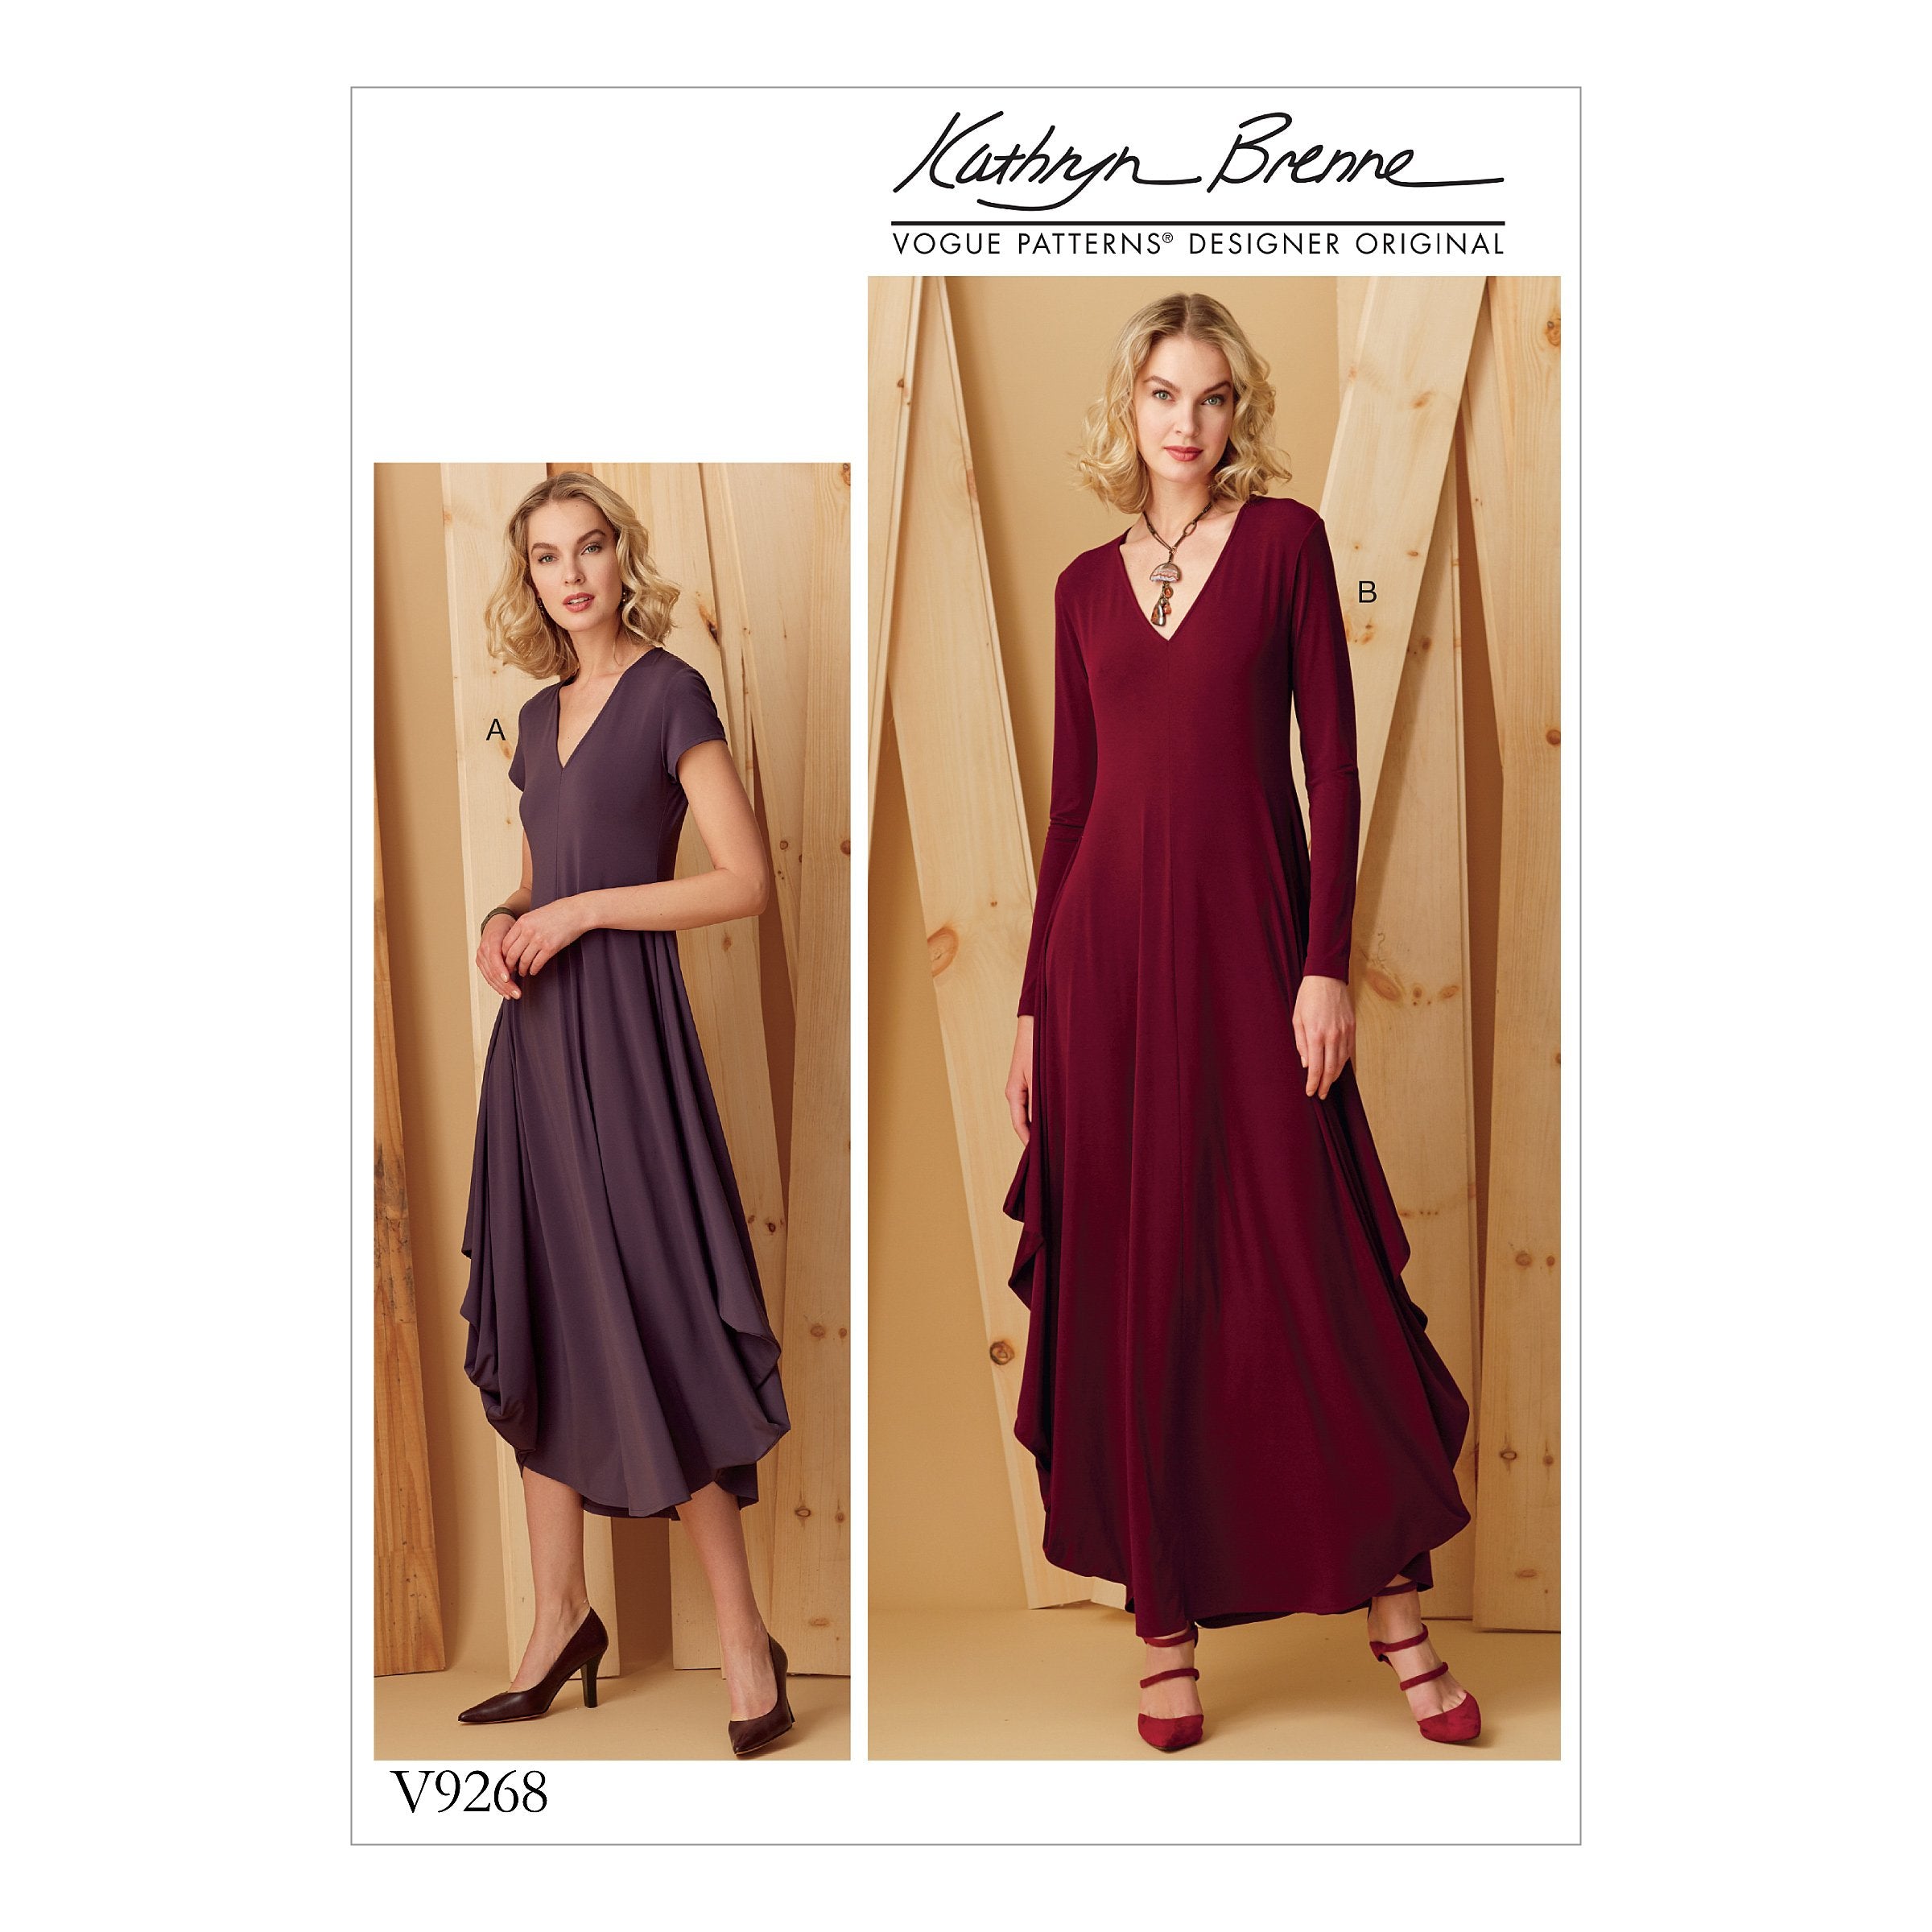 Vogue Pattern 9268 Knit, V-Neck, Draped Dresses | Kathryn Brenne from Jaycotts Sewing Supplies